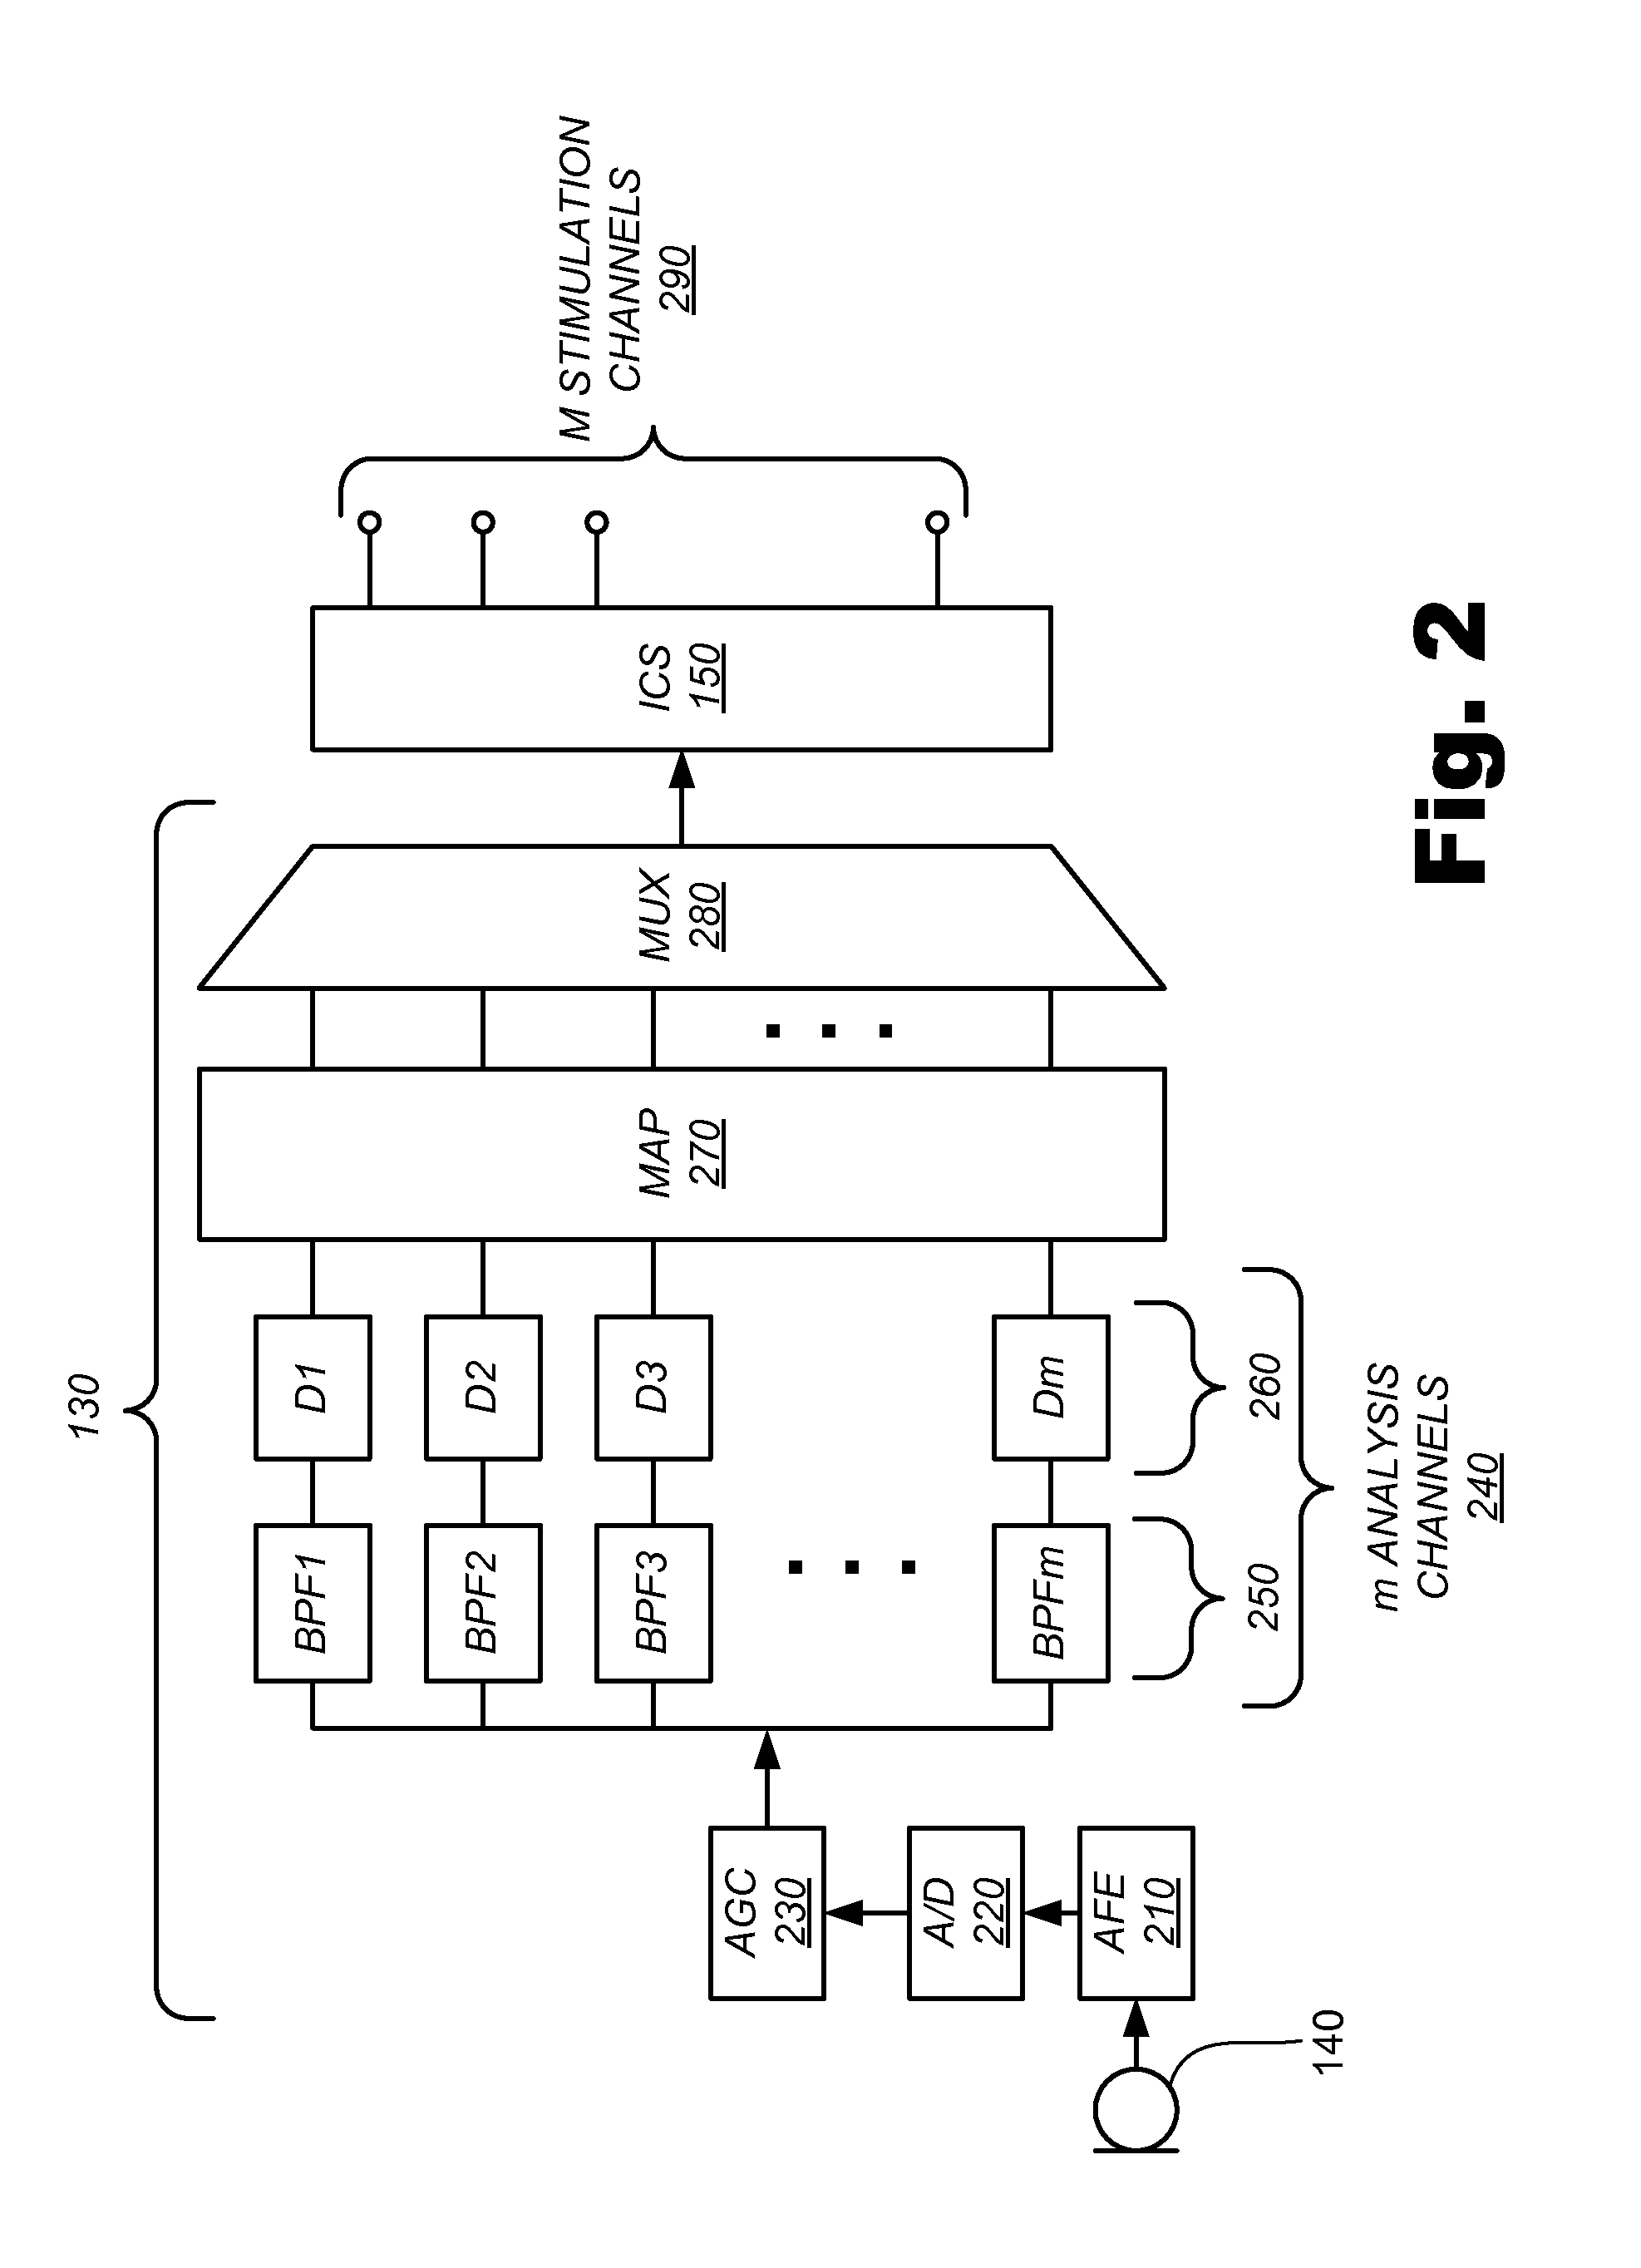 Channel-Specific Adjustment of Sound Processing Strategies Based on Electrode Impedance